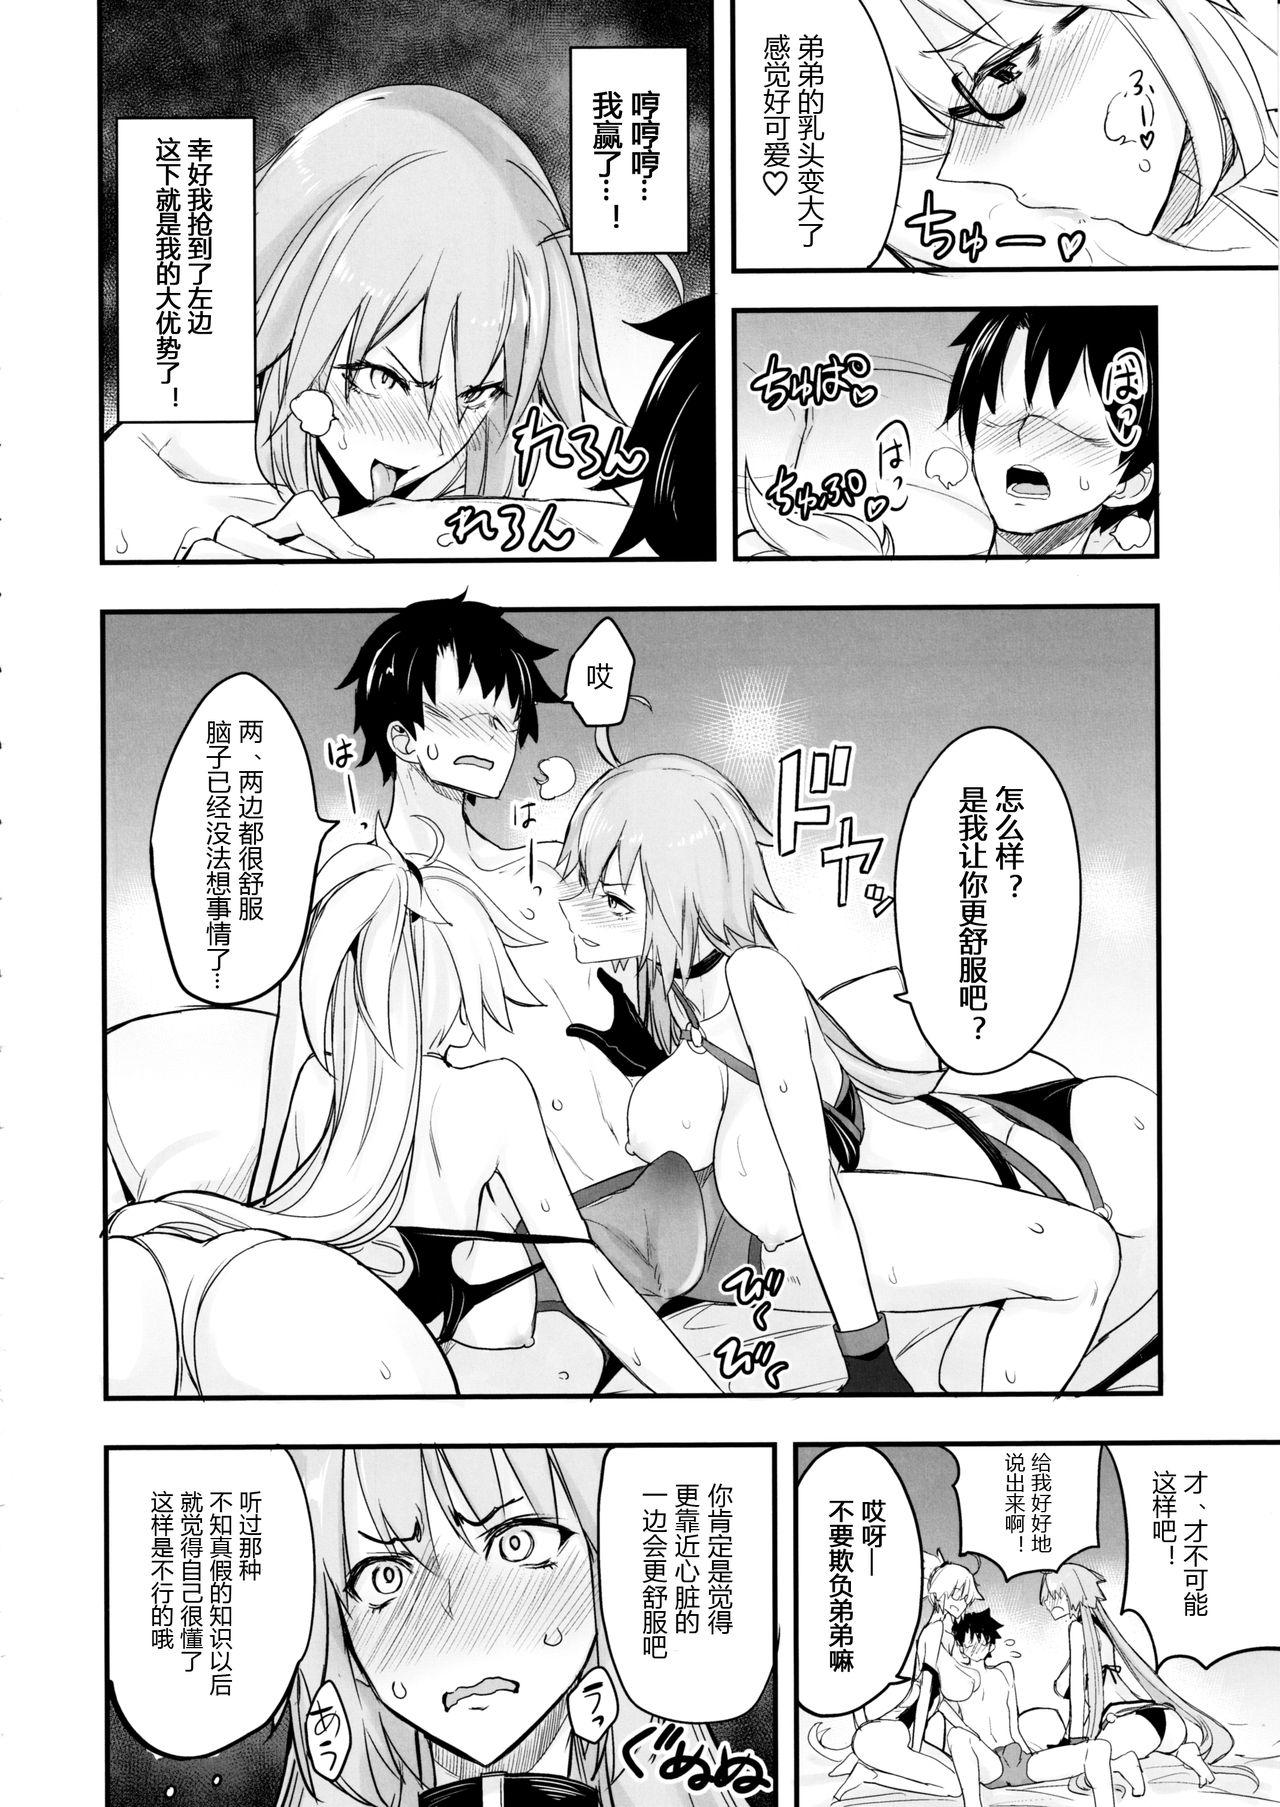 Phat Ass W Jeanne vs Master - Fate grand order Gay Pawn - Page 8